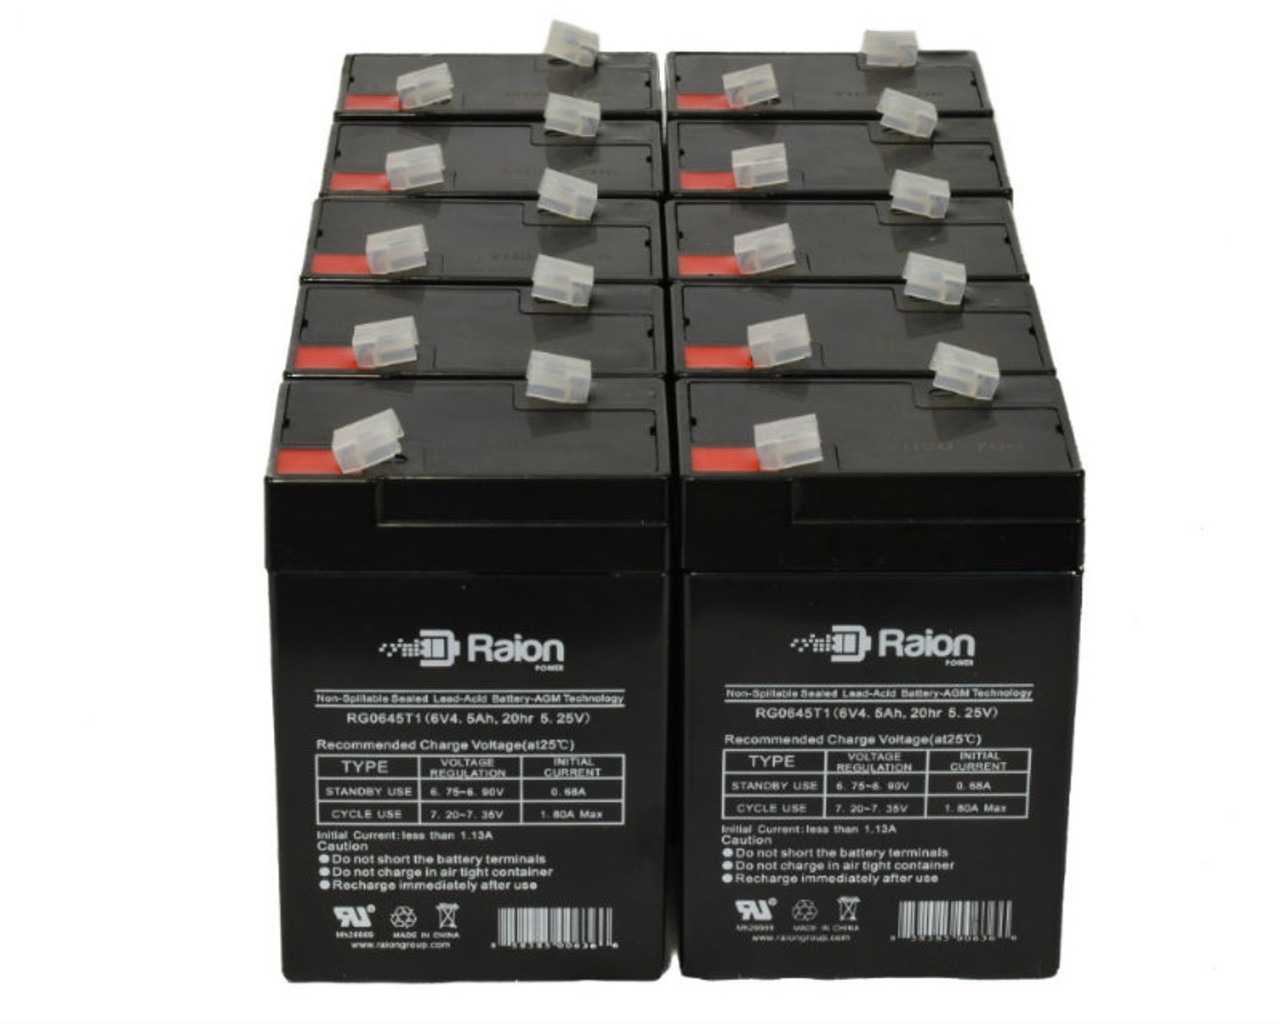 Raion Power 6 Volt 4.5Ah RG0645T1 Replacement Battery for Multipower MP4.5-6 - 10 Pack